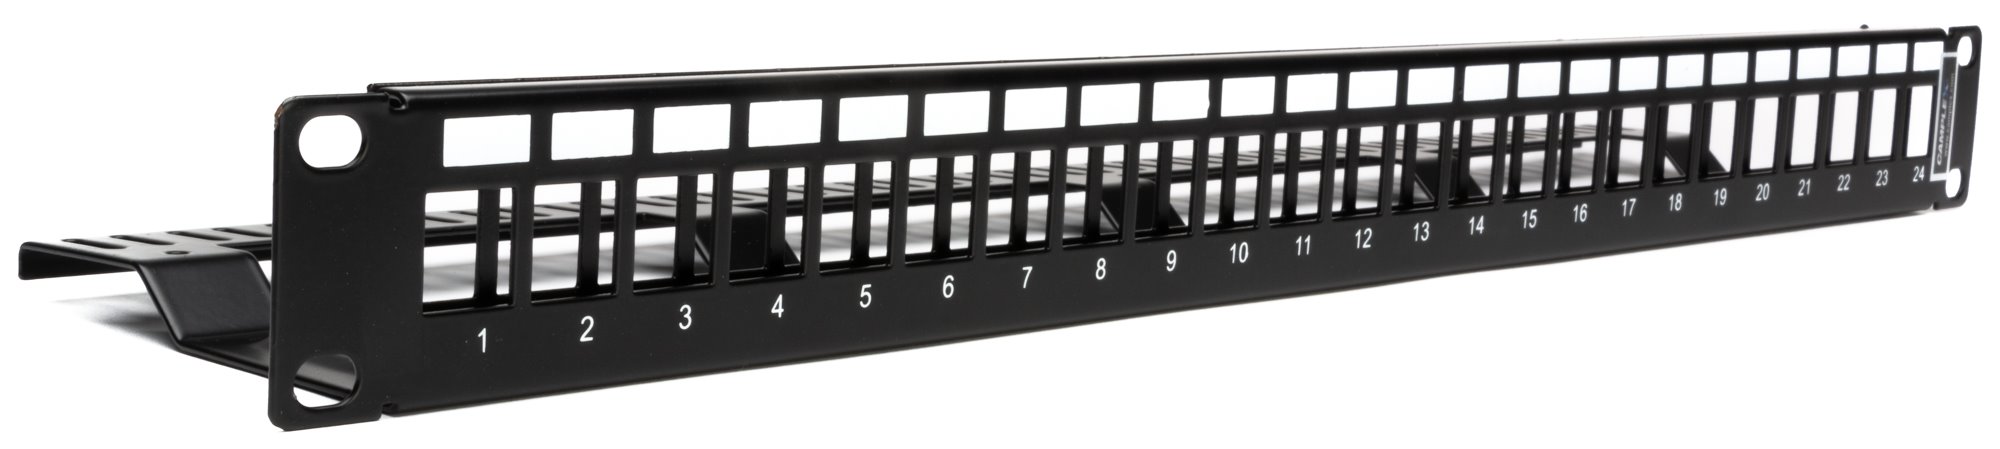 Camplex CMX-KP-1001 Keystone Patch Panel -  Blank 1U/1RU 24-Port with Cable Manager